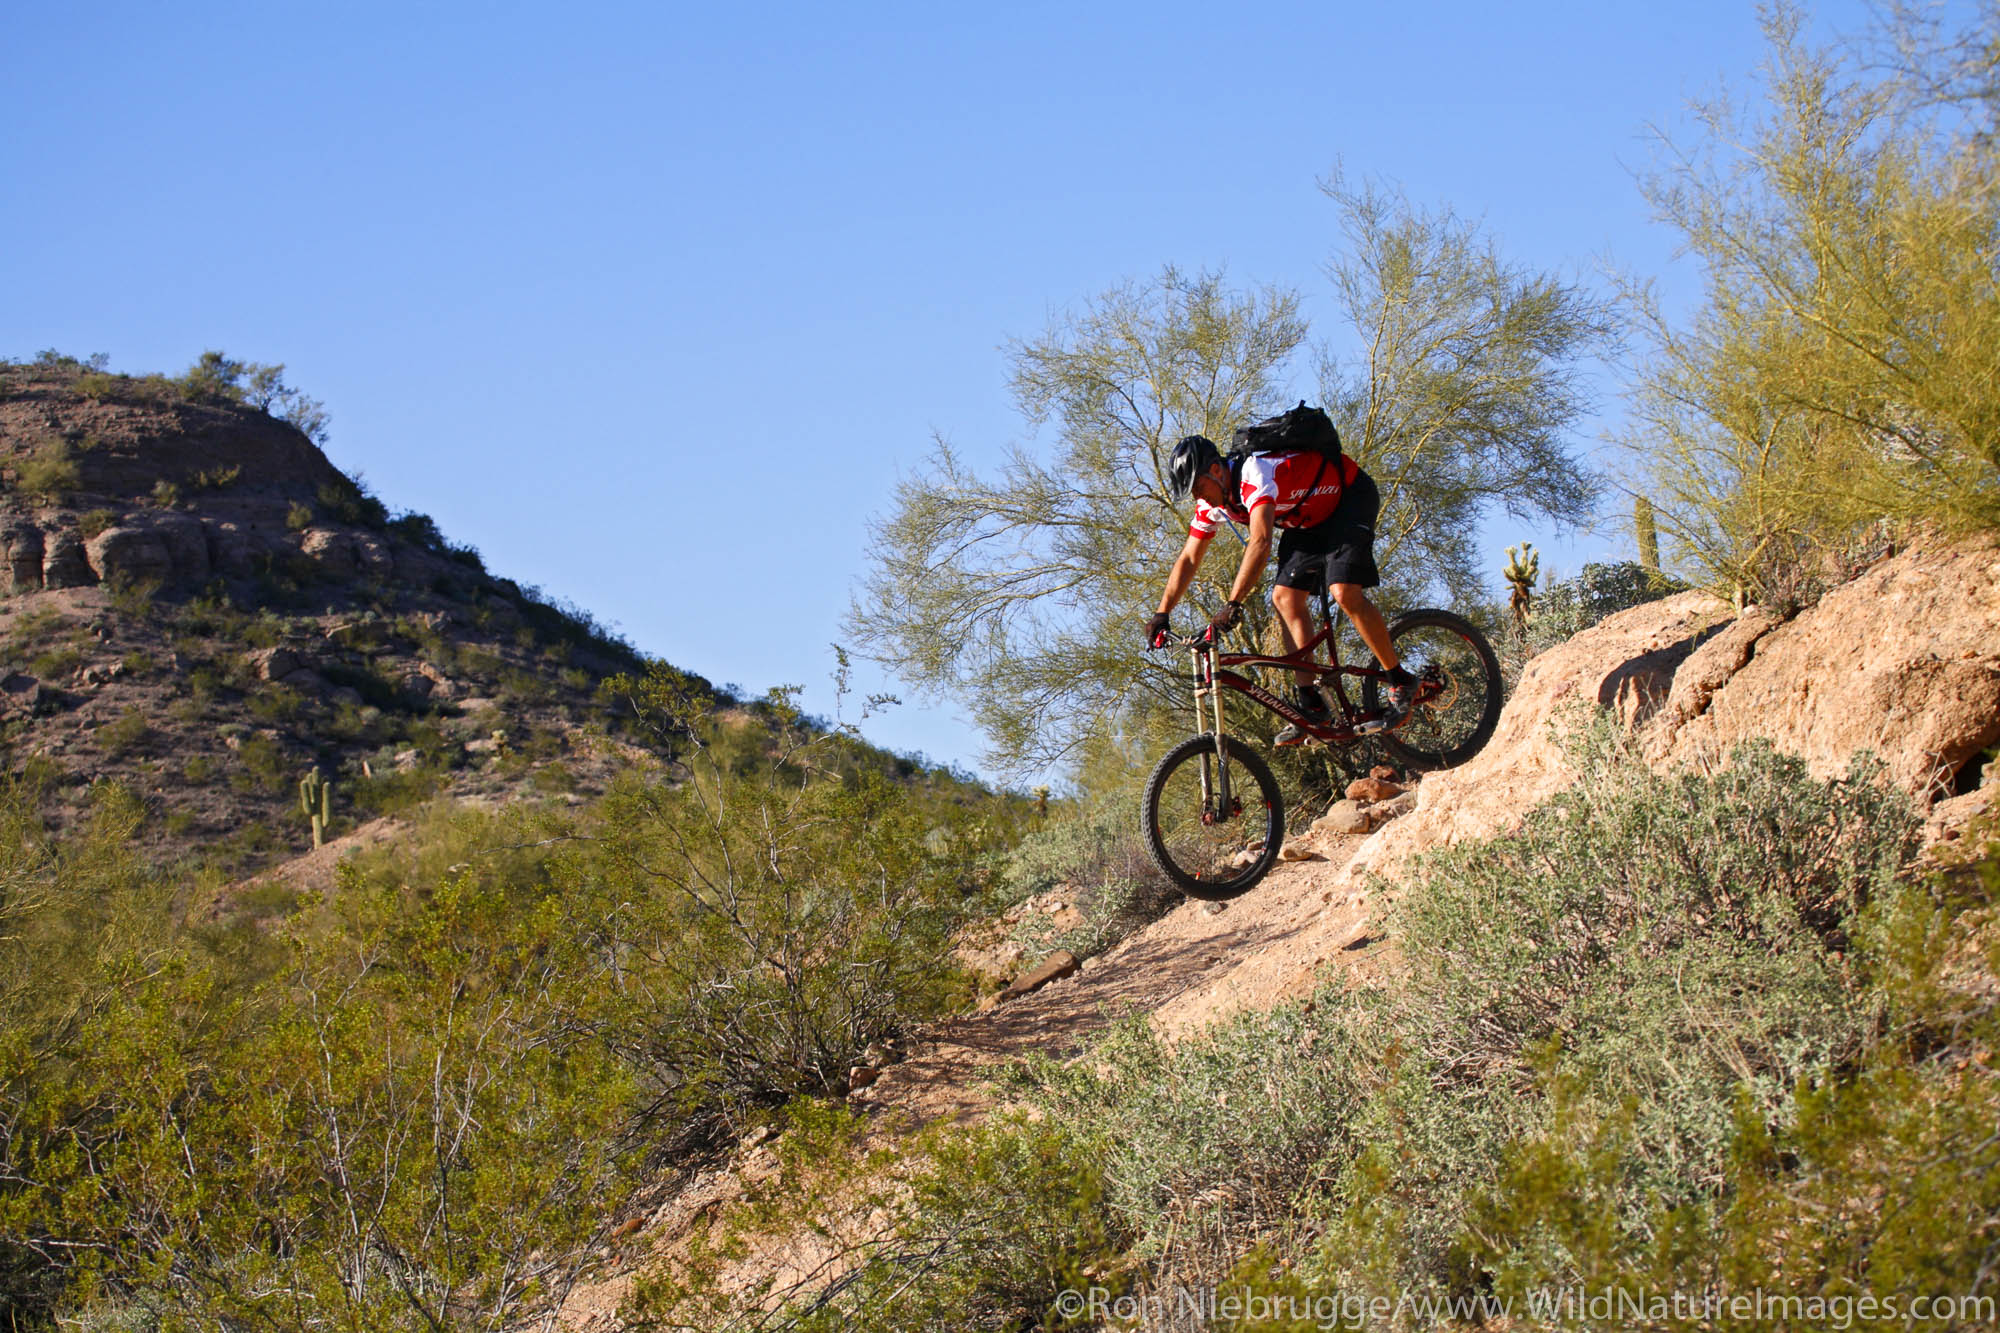 A mountain biker leaps off a ledge on the Technical Loop, one of the competitive race tracks at McDowell Mountain Regional Park...